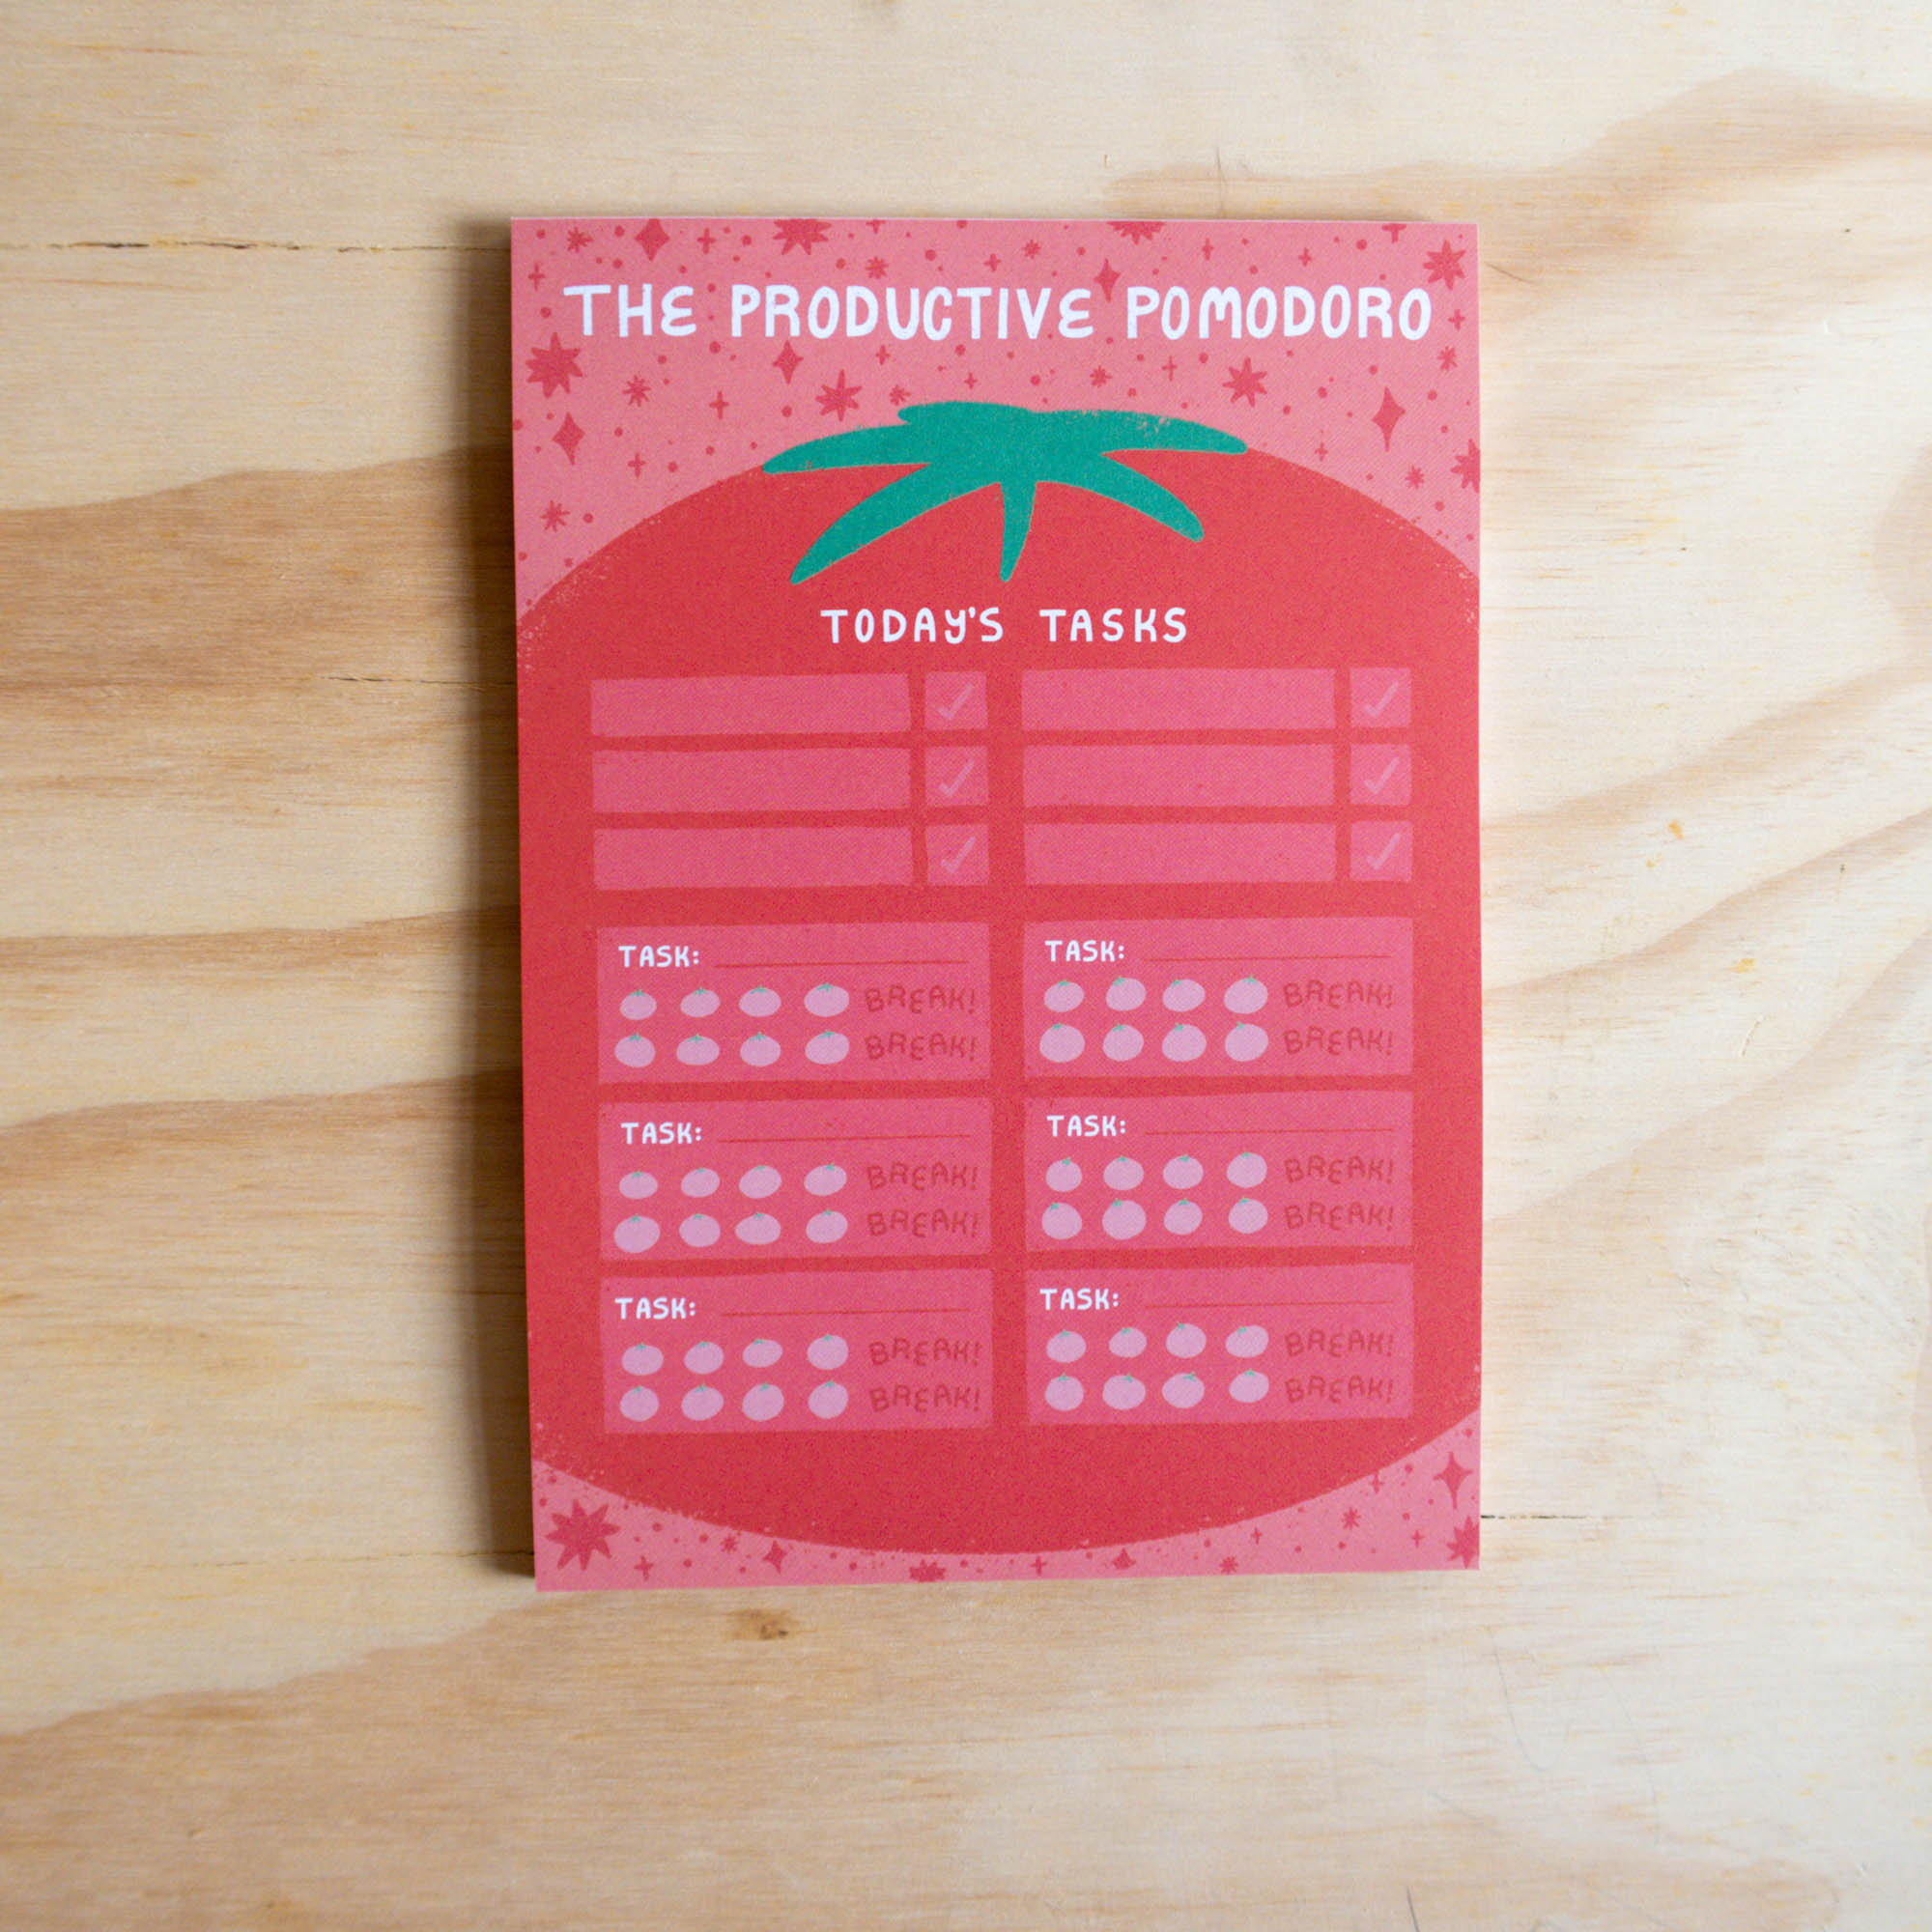 How to Get More Done in Less Time: The Pomodoro Method